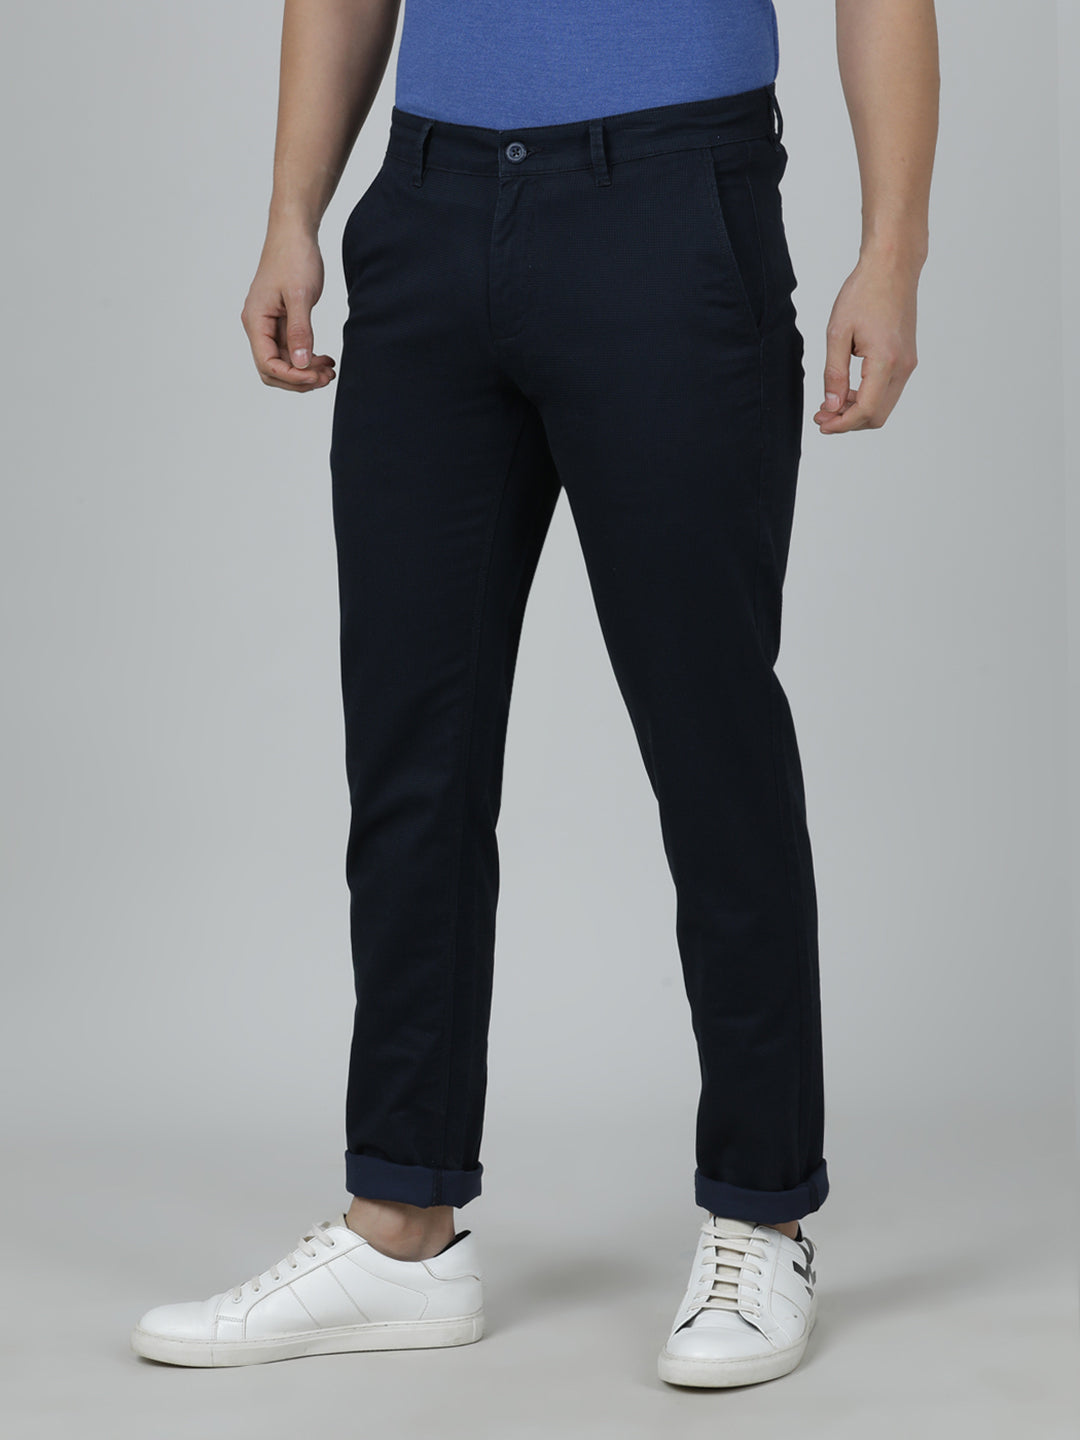 Navy Printed Casual Trouser